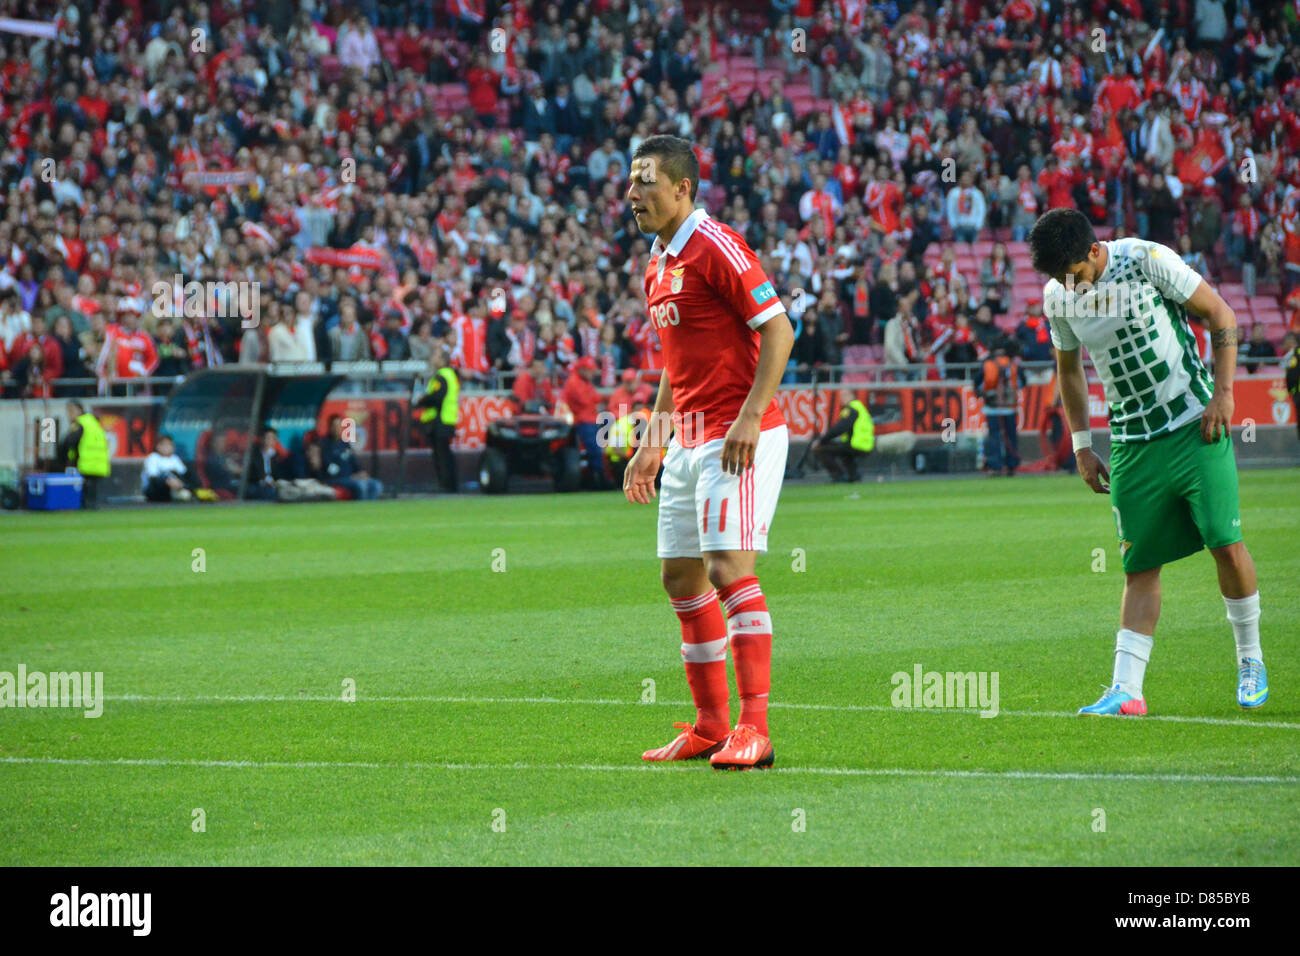 Lima player prepairs to shoot the penalty that give the 3 goal to Benfica team. Stock Photo